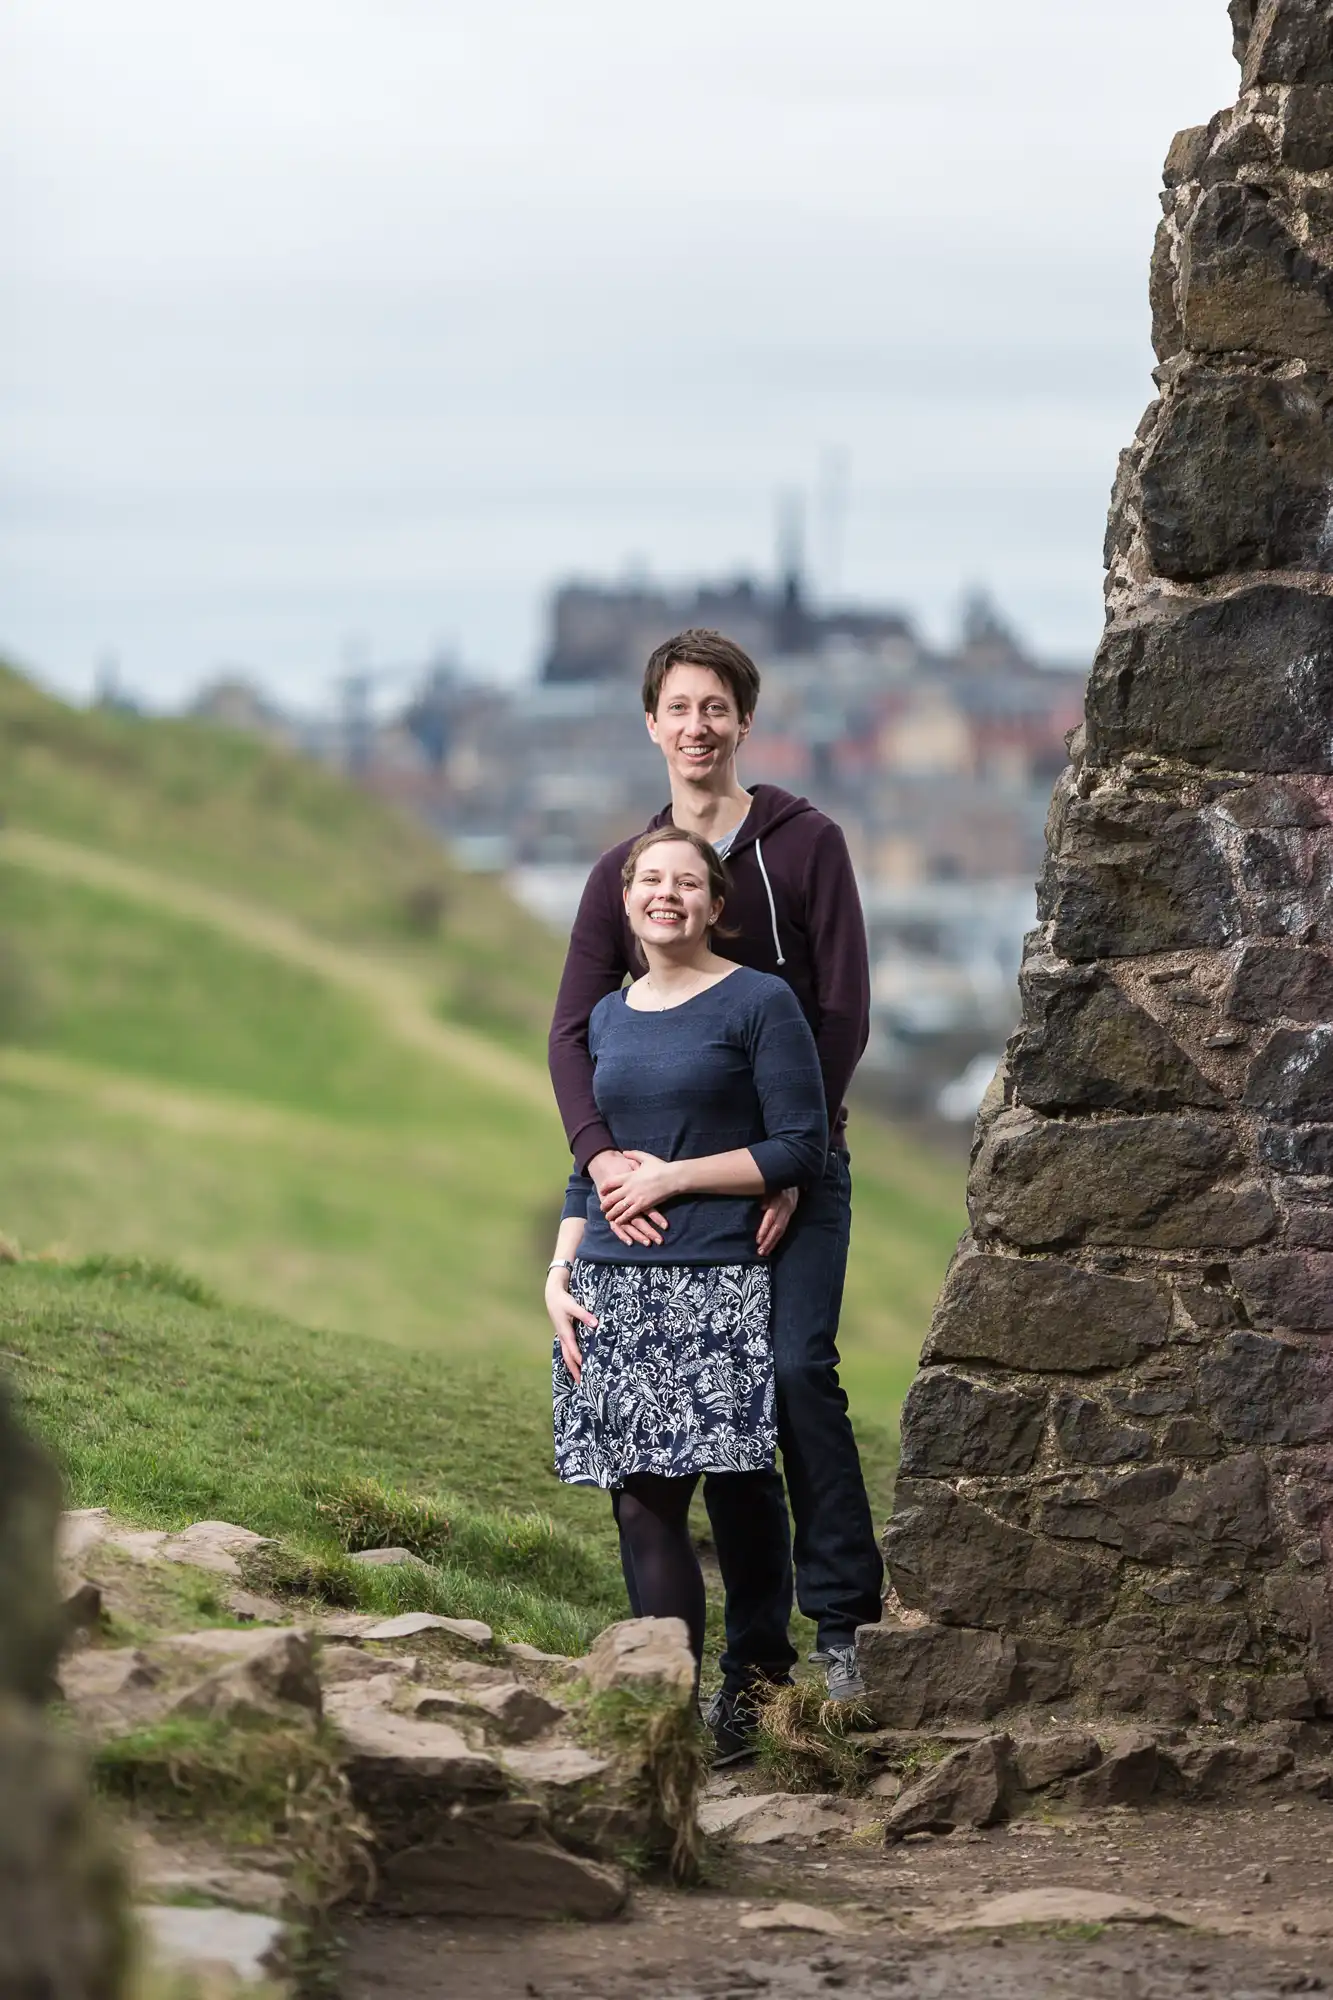 A couple smiling and posing together on a grassy hill, with a historic cityscape blurred in the background.